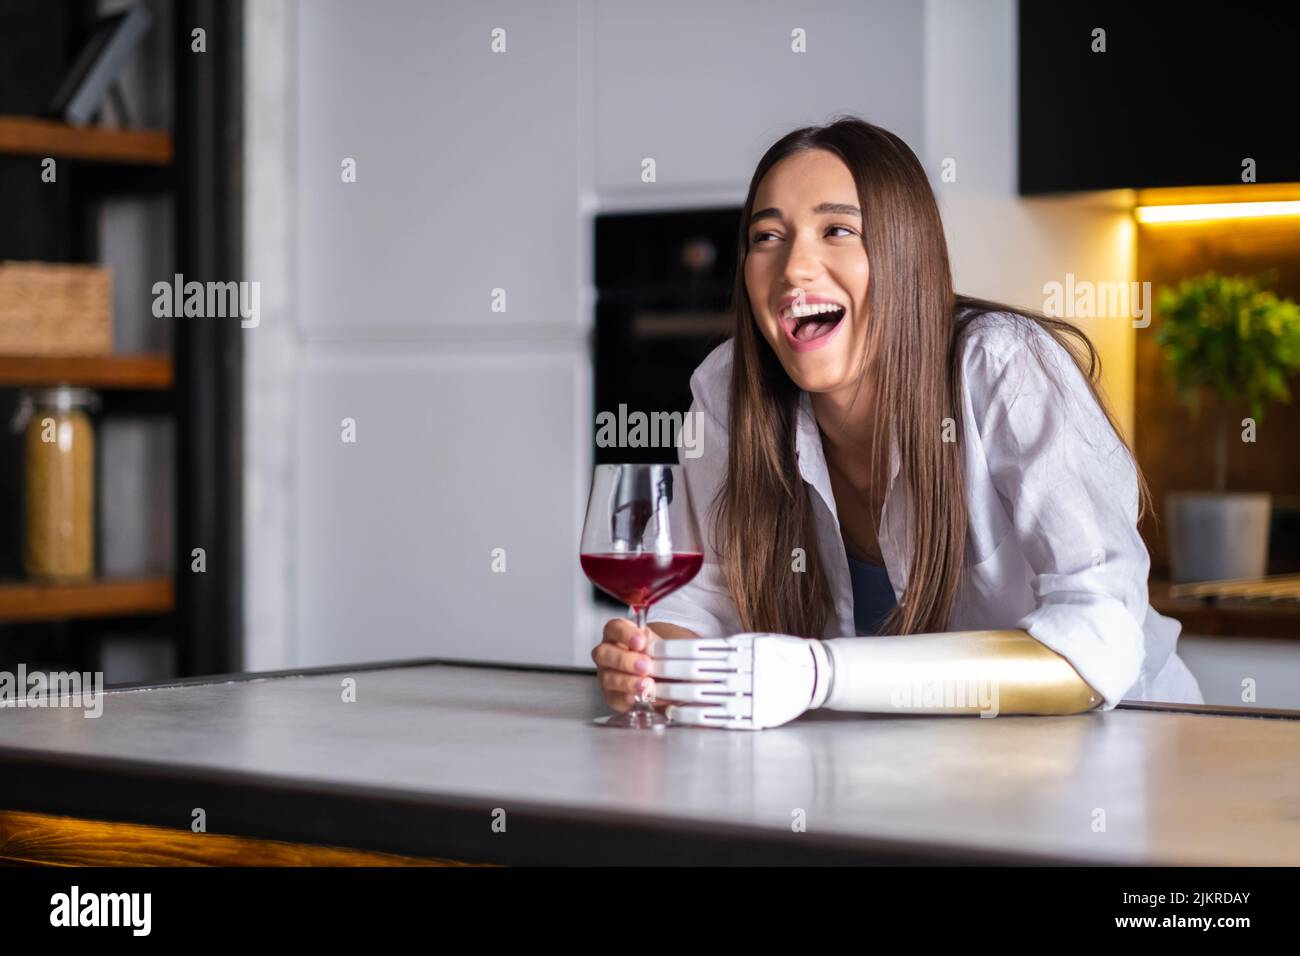 Expressive exited Laughing girl prosthetic arm with glass of wine at home, woman leads normal life artificial prosthetic limb, people with special Stock Photo